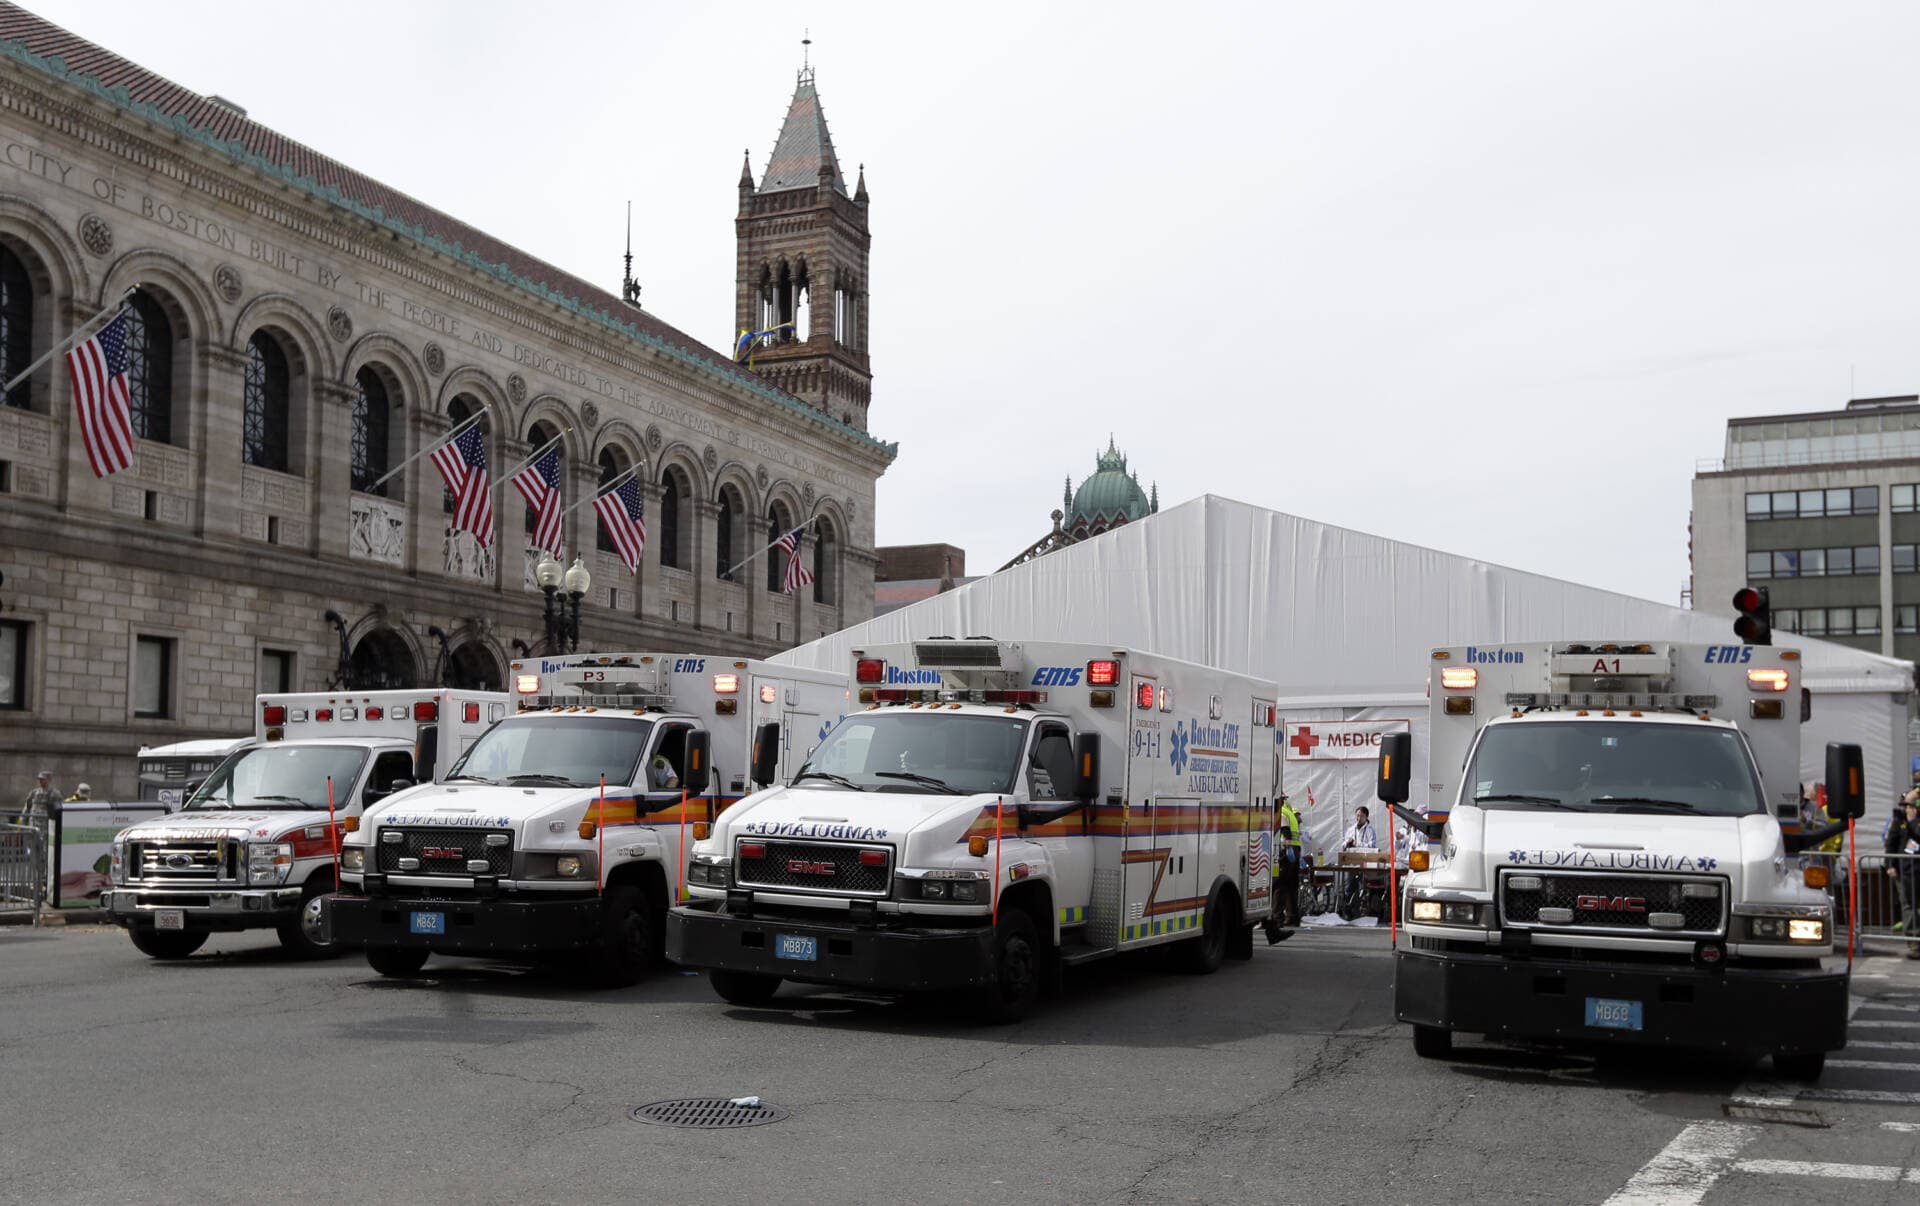 Ambulances sit outside the medical tent at the Boston Marathon finish area in the aftermath of two blasts at the 2013 Boston Marathon finish area. (Elise Amendola/AP)